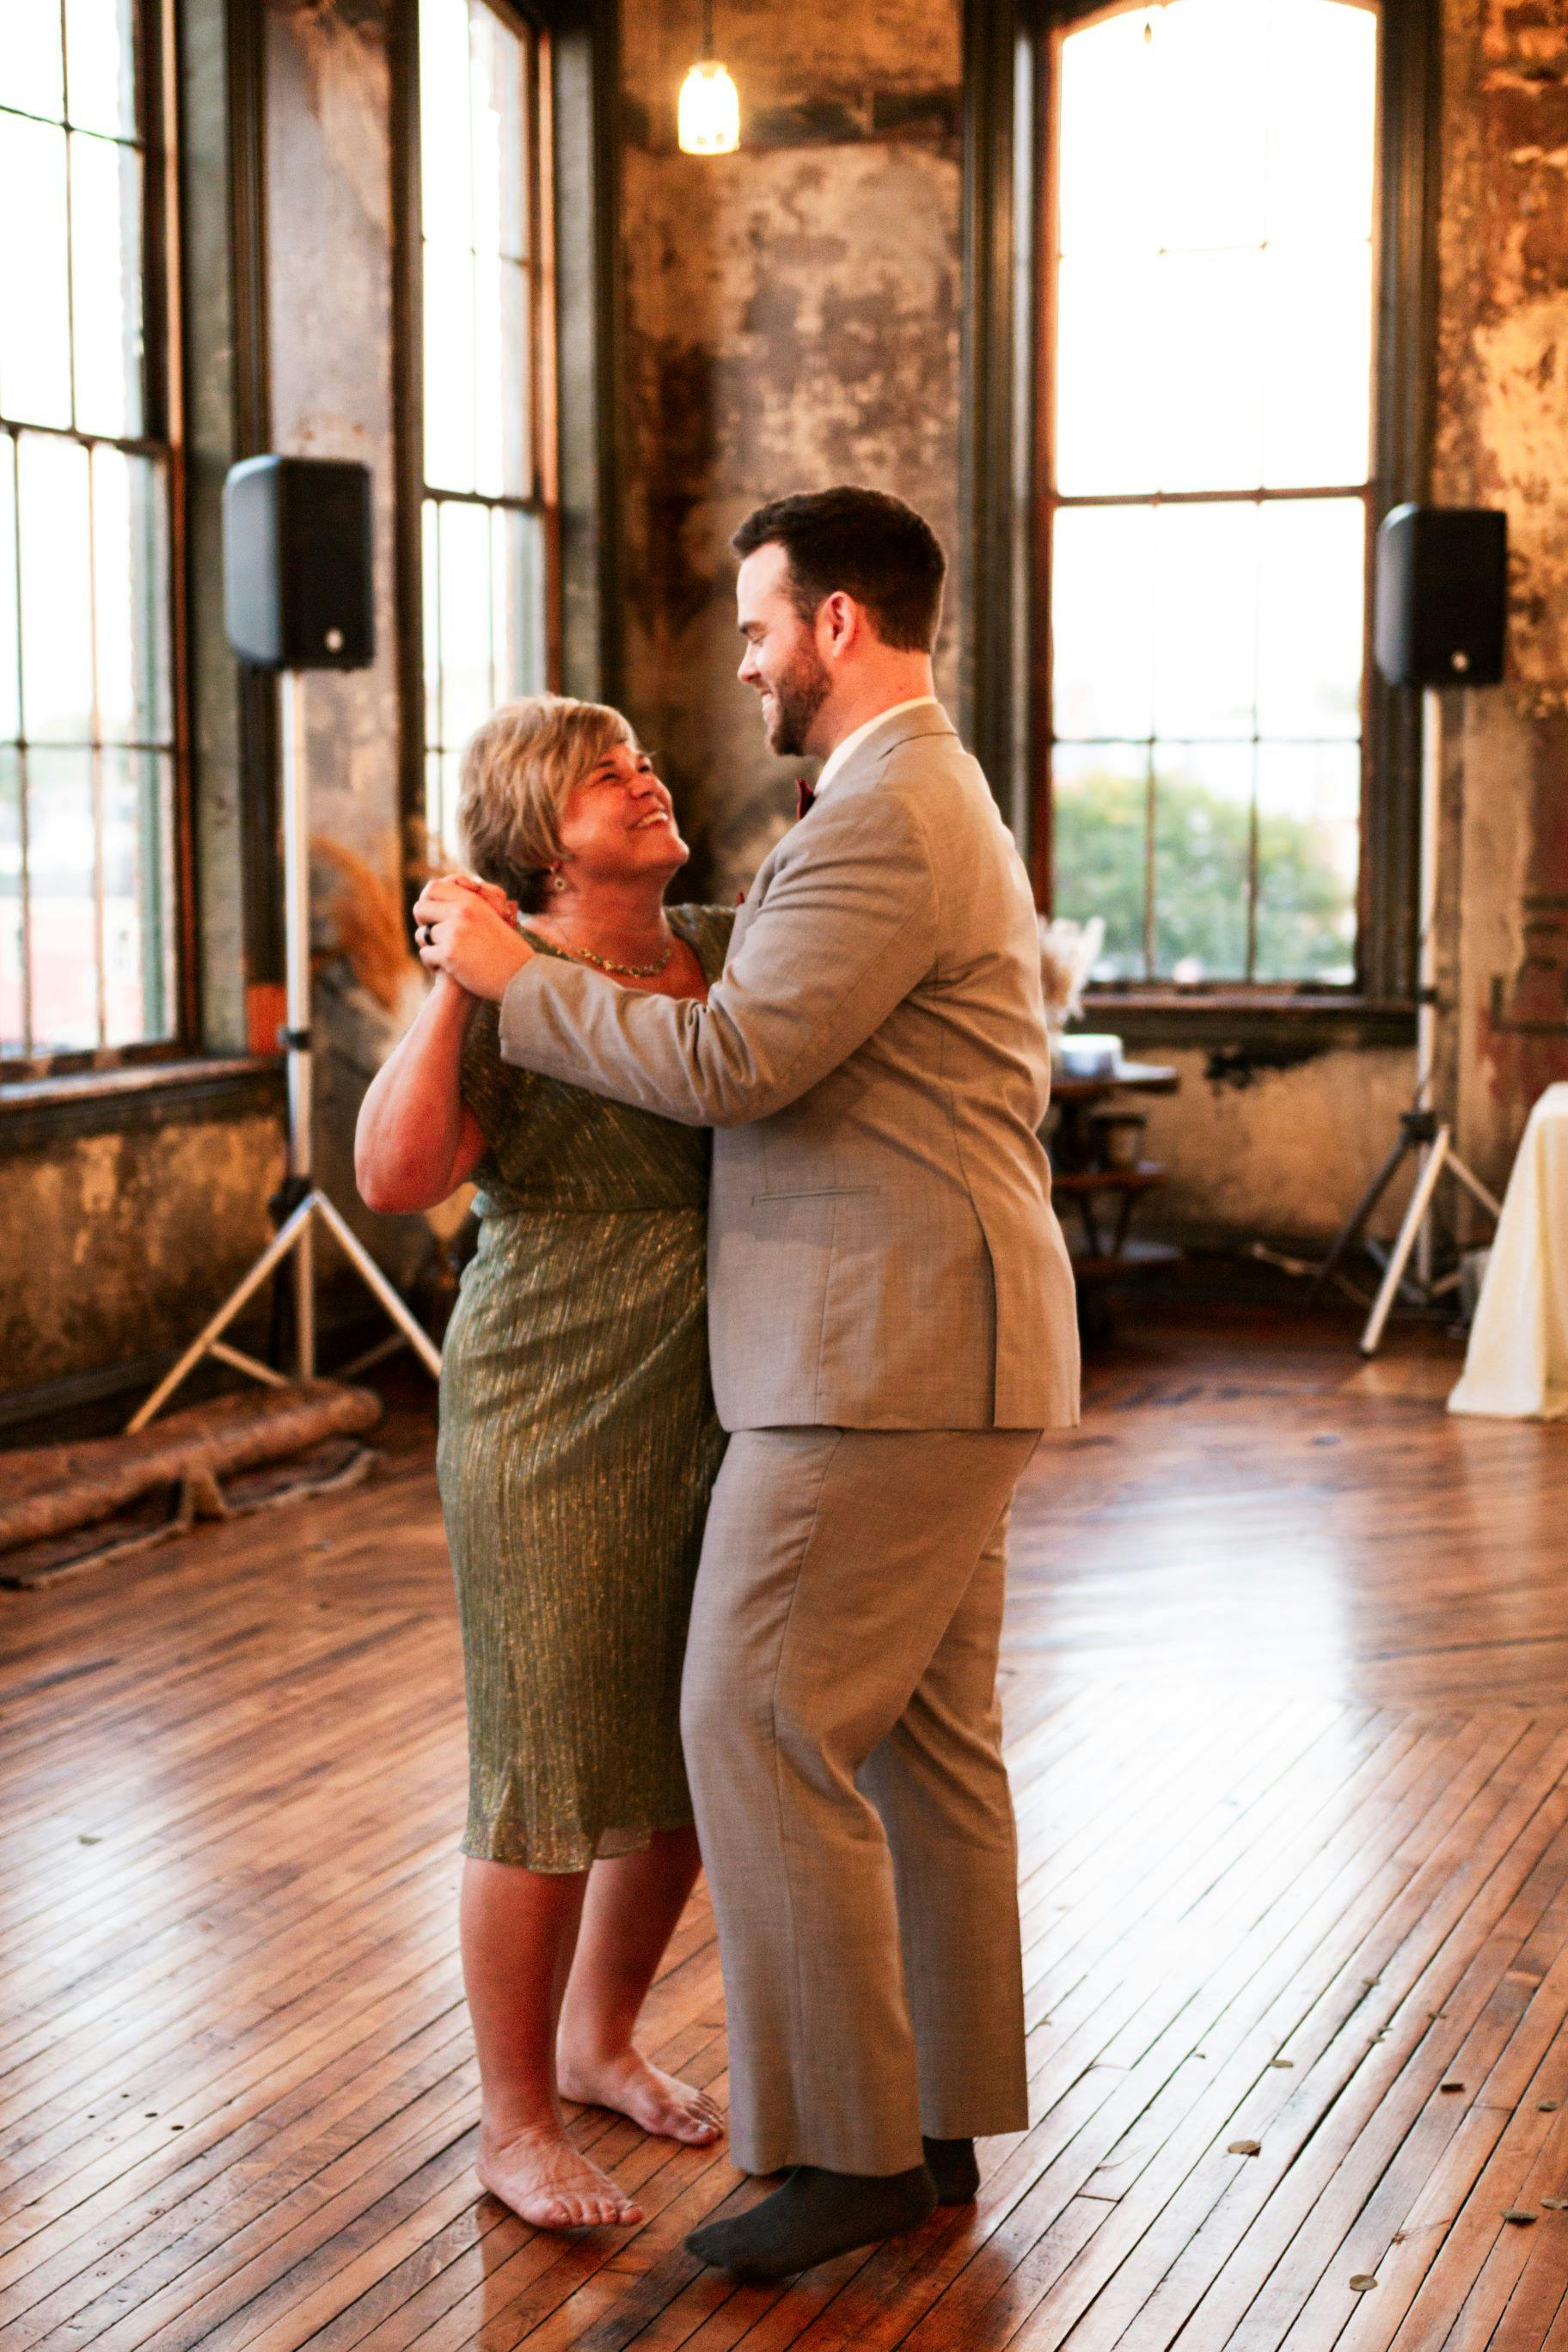 Mother Son Dance